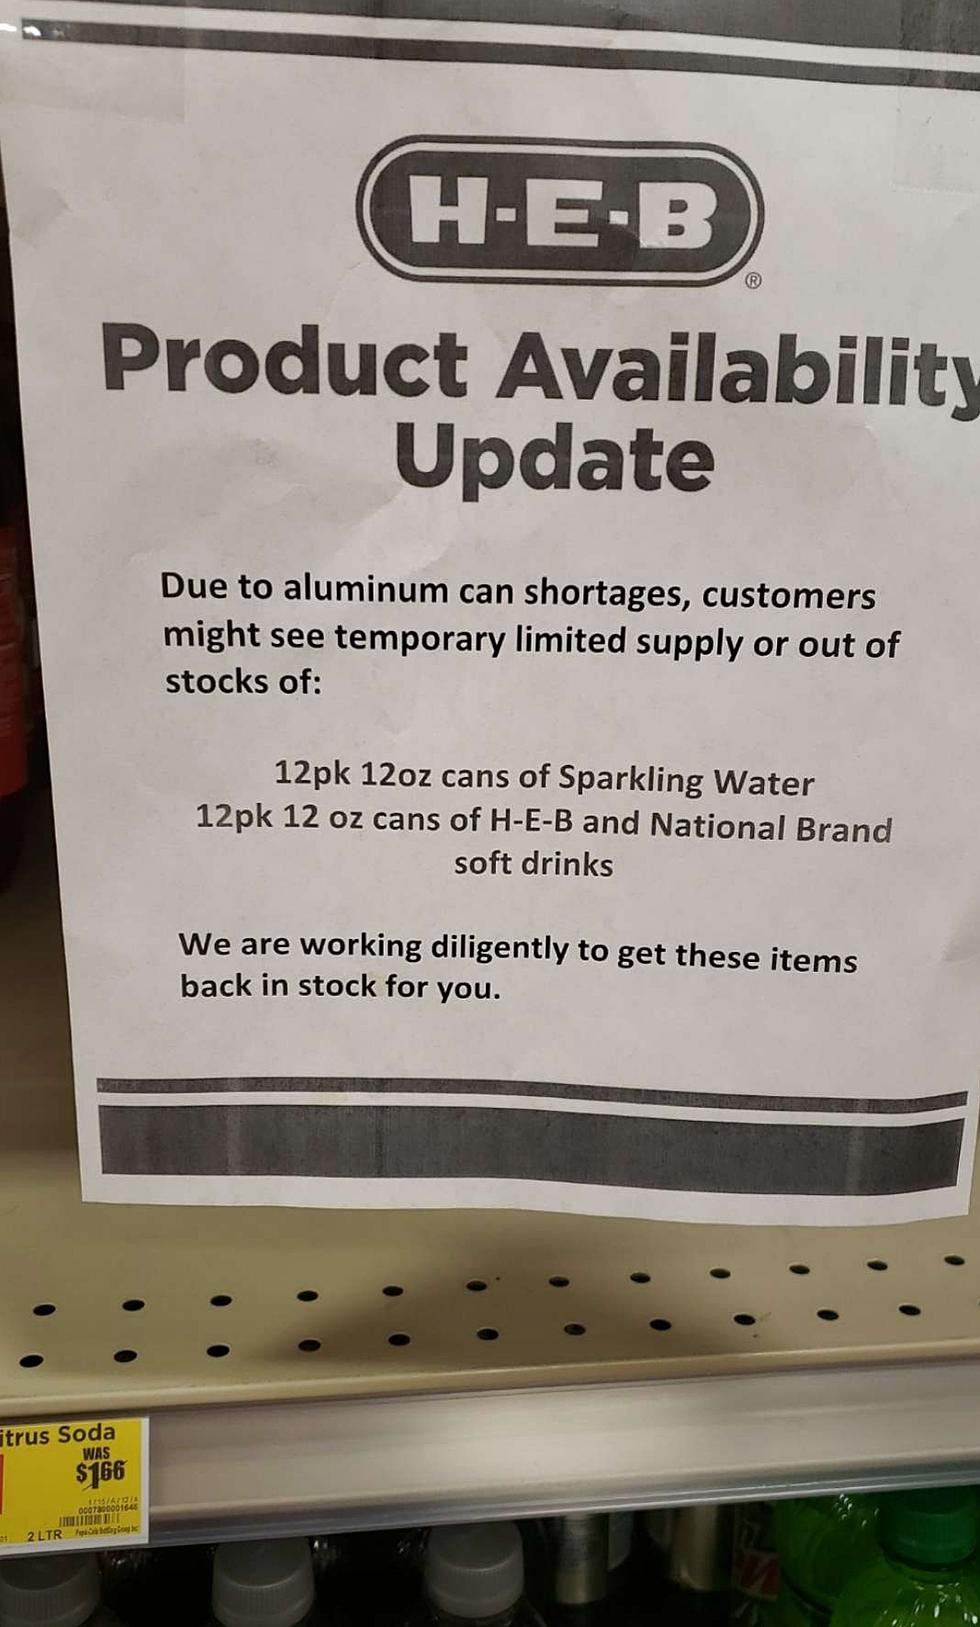 Were You Aware Of This Shortage?